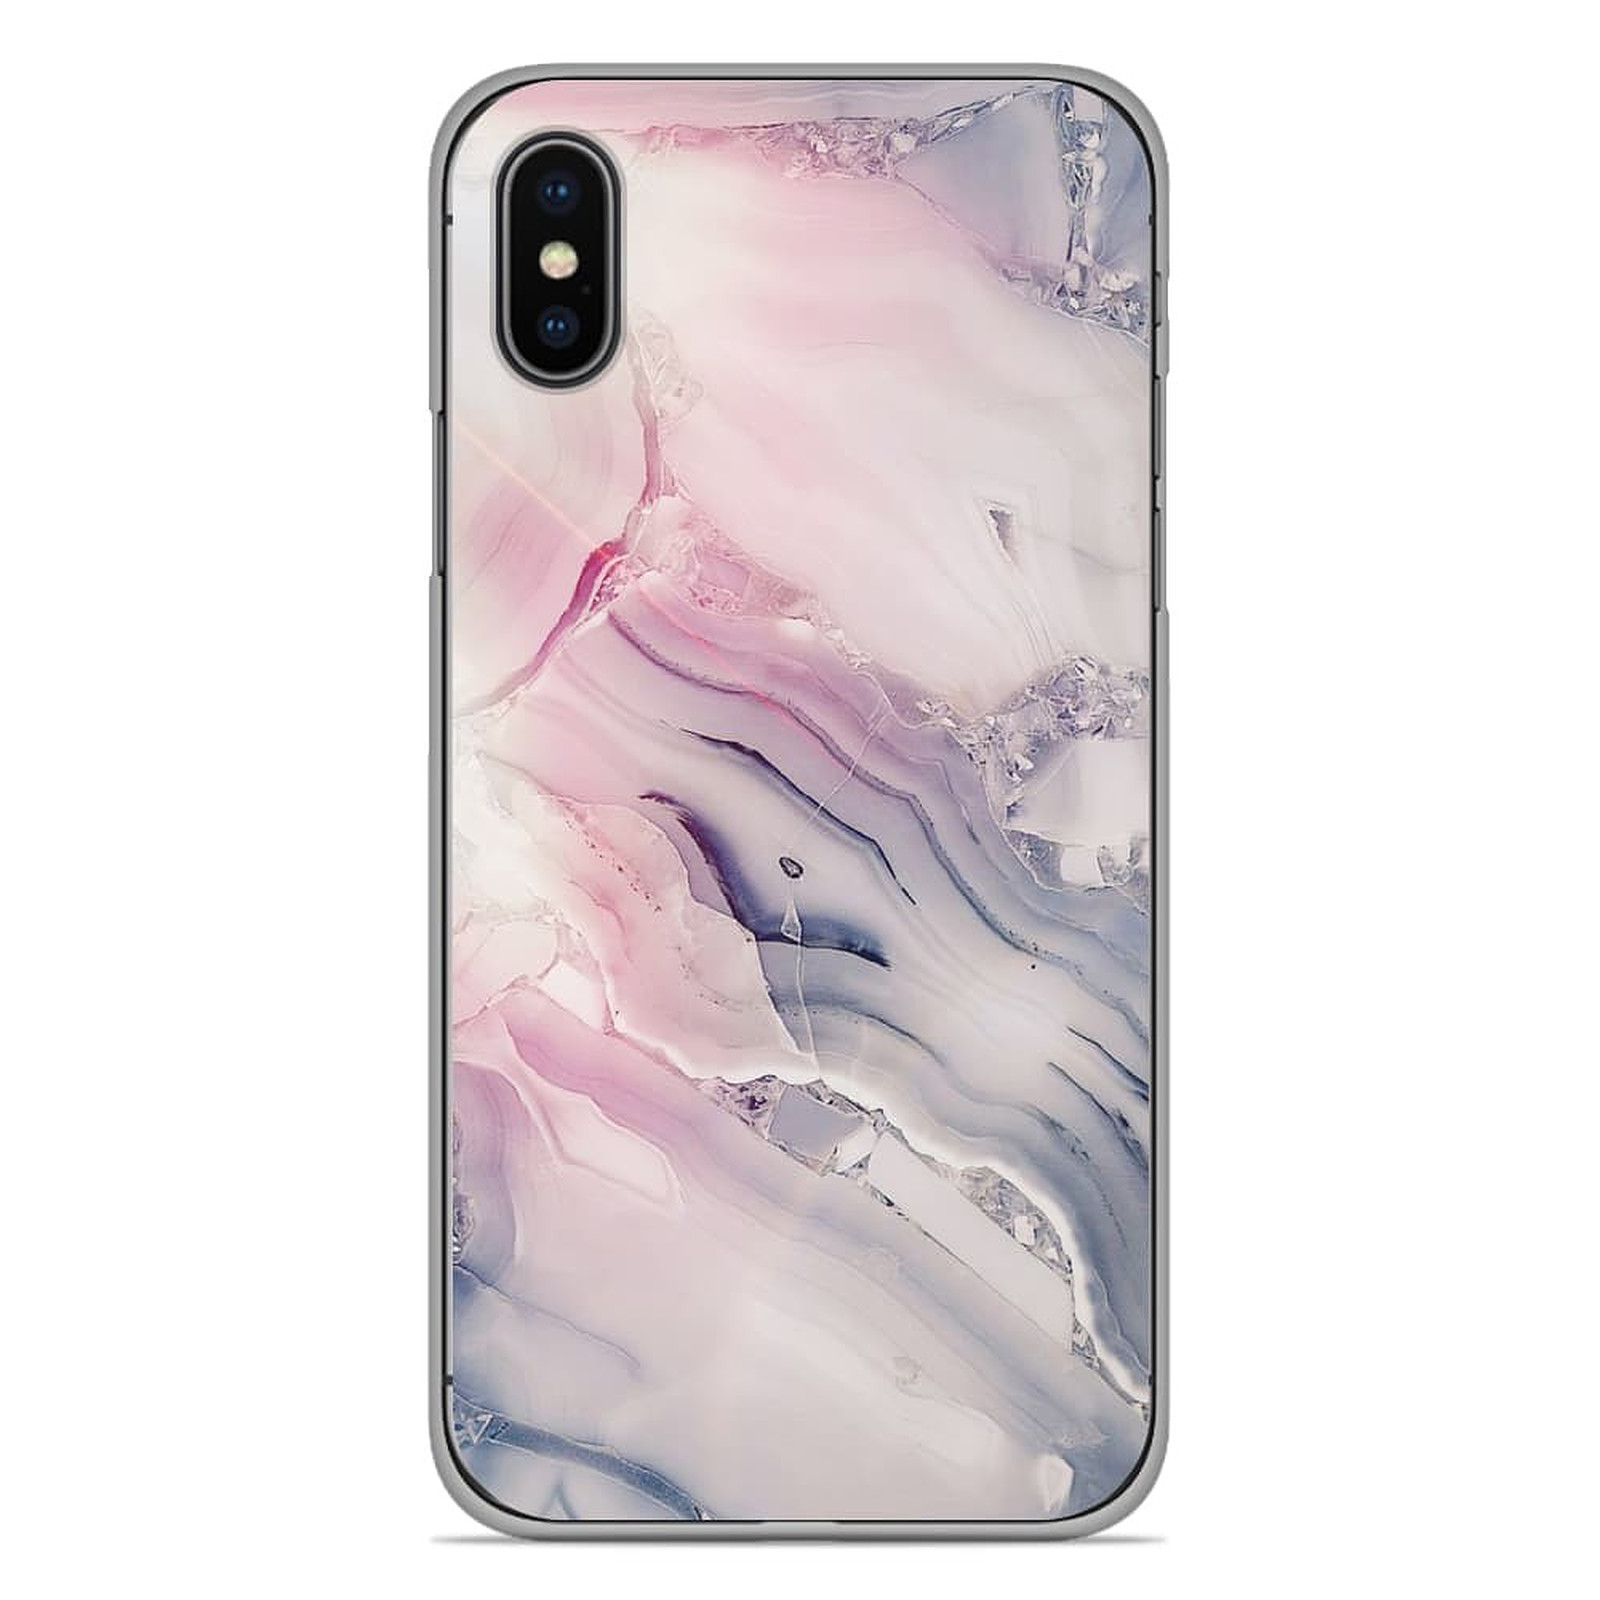 1001 Coques Coque silicone gel Apple iPhone XS Max motif Zoom sur Pierre Claire - Coque telephone 1001Coques